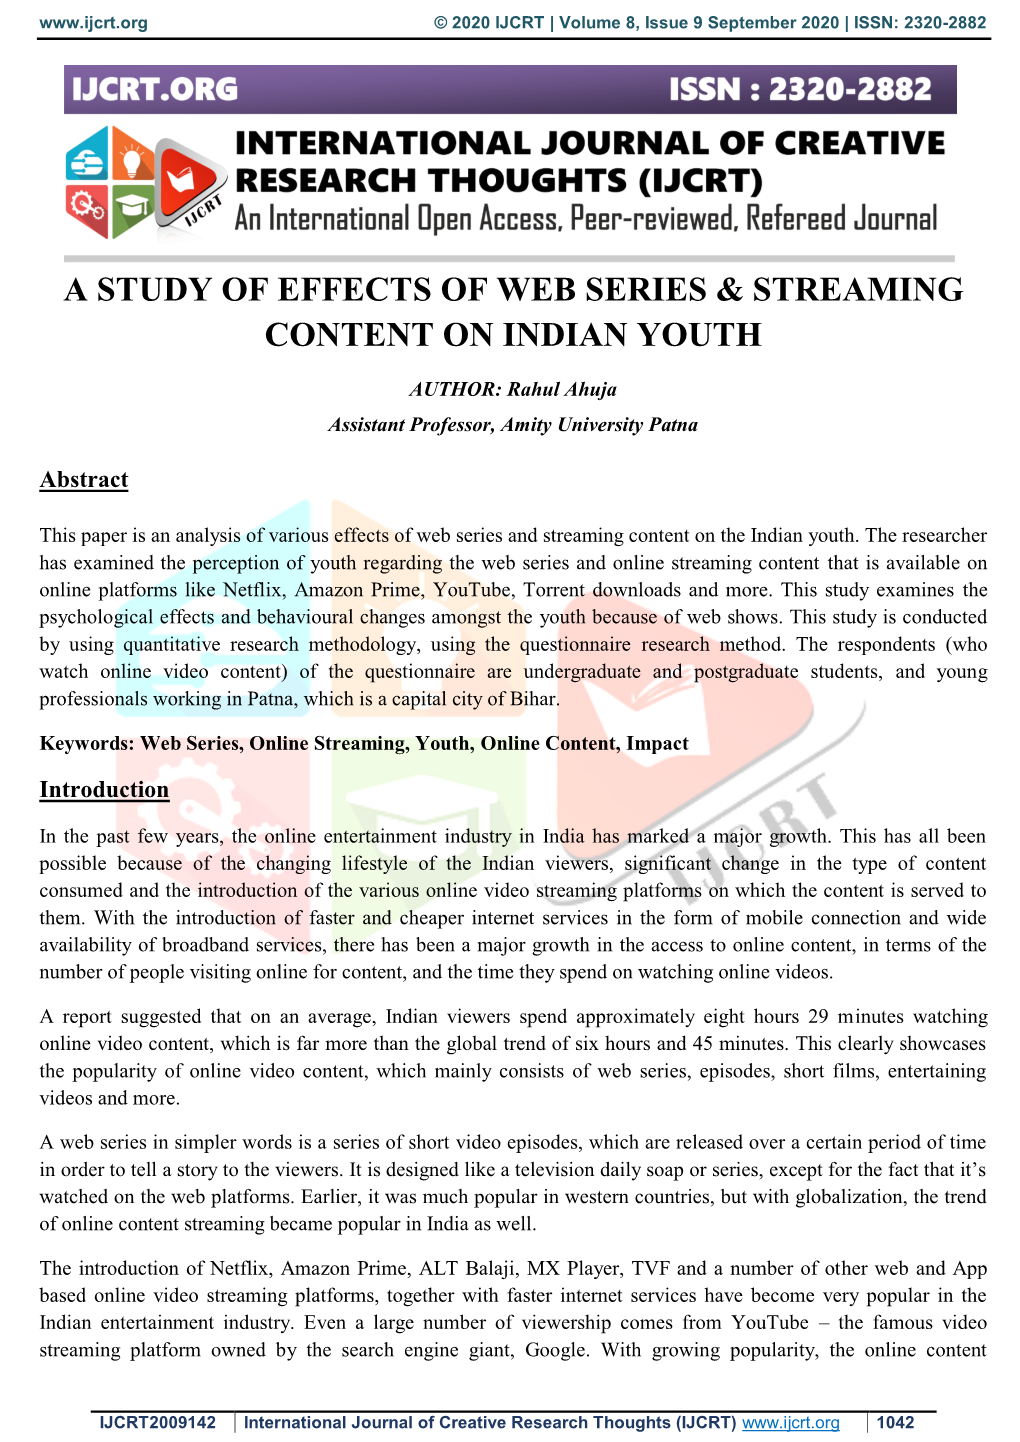 A Study of Effects of Web Series & Streaming Content